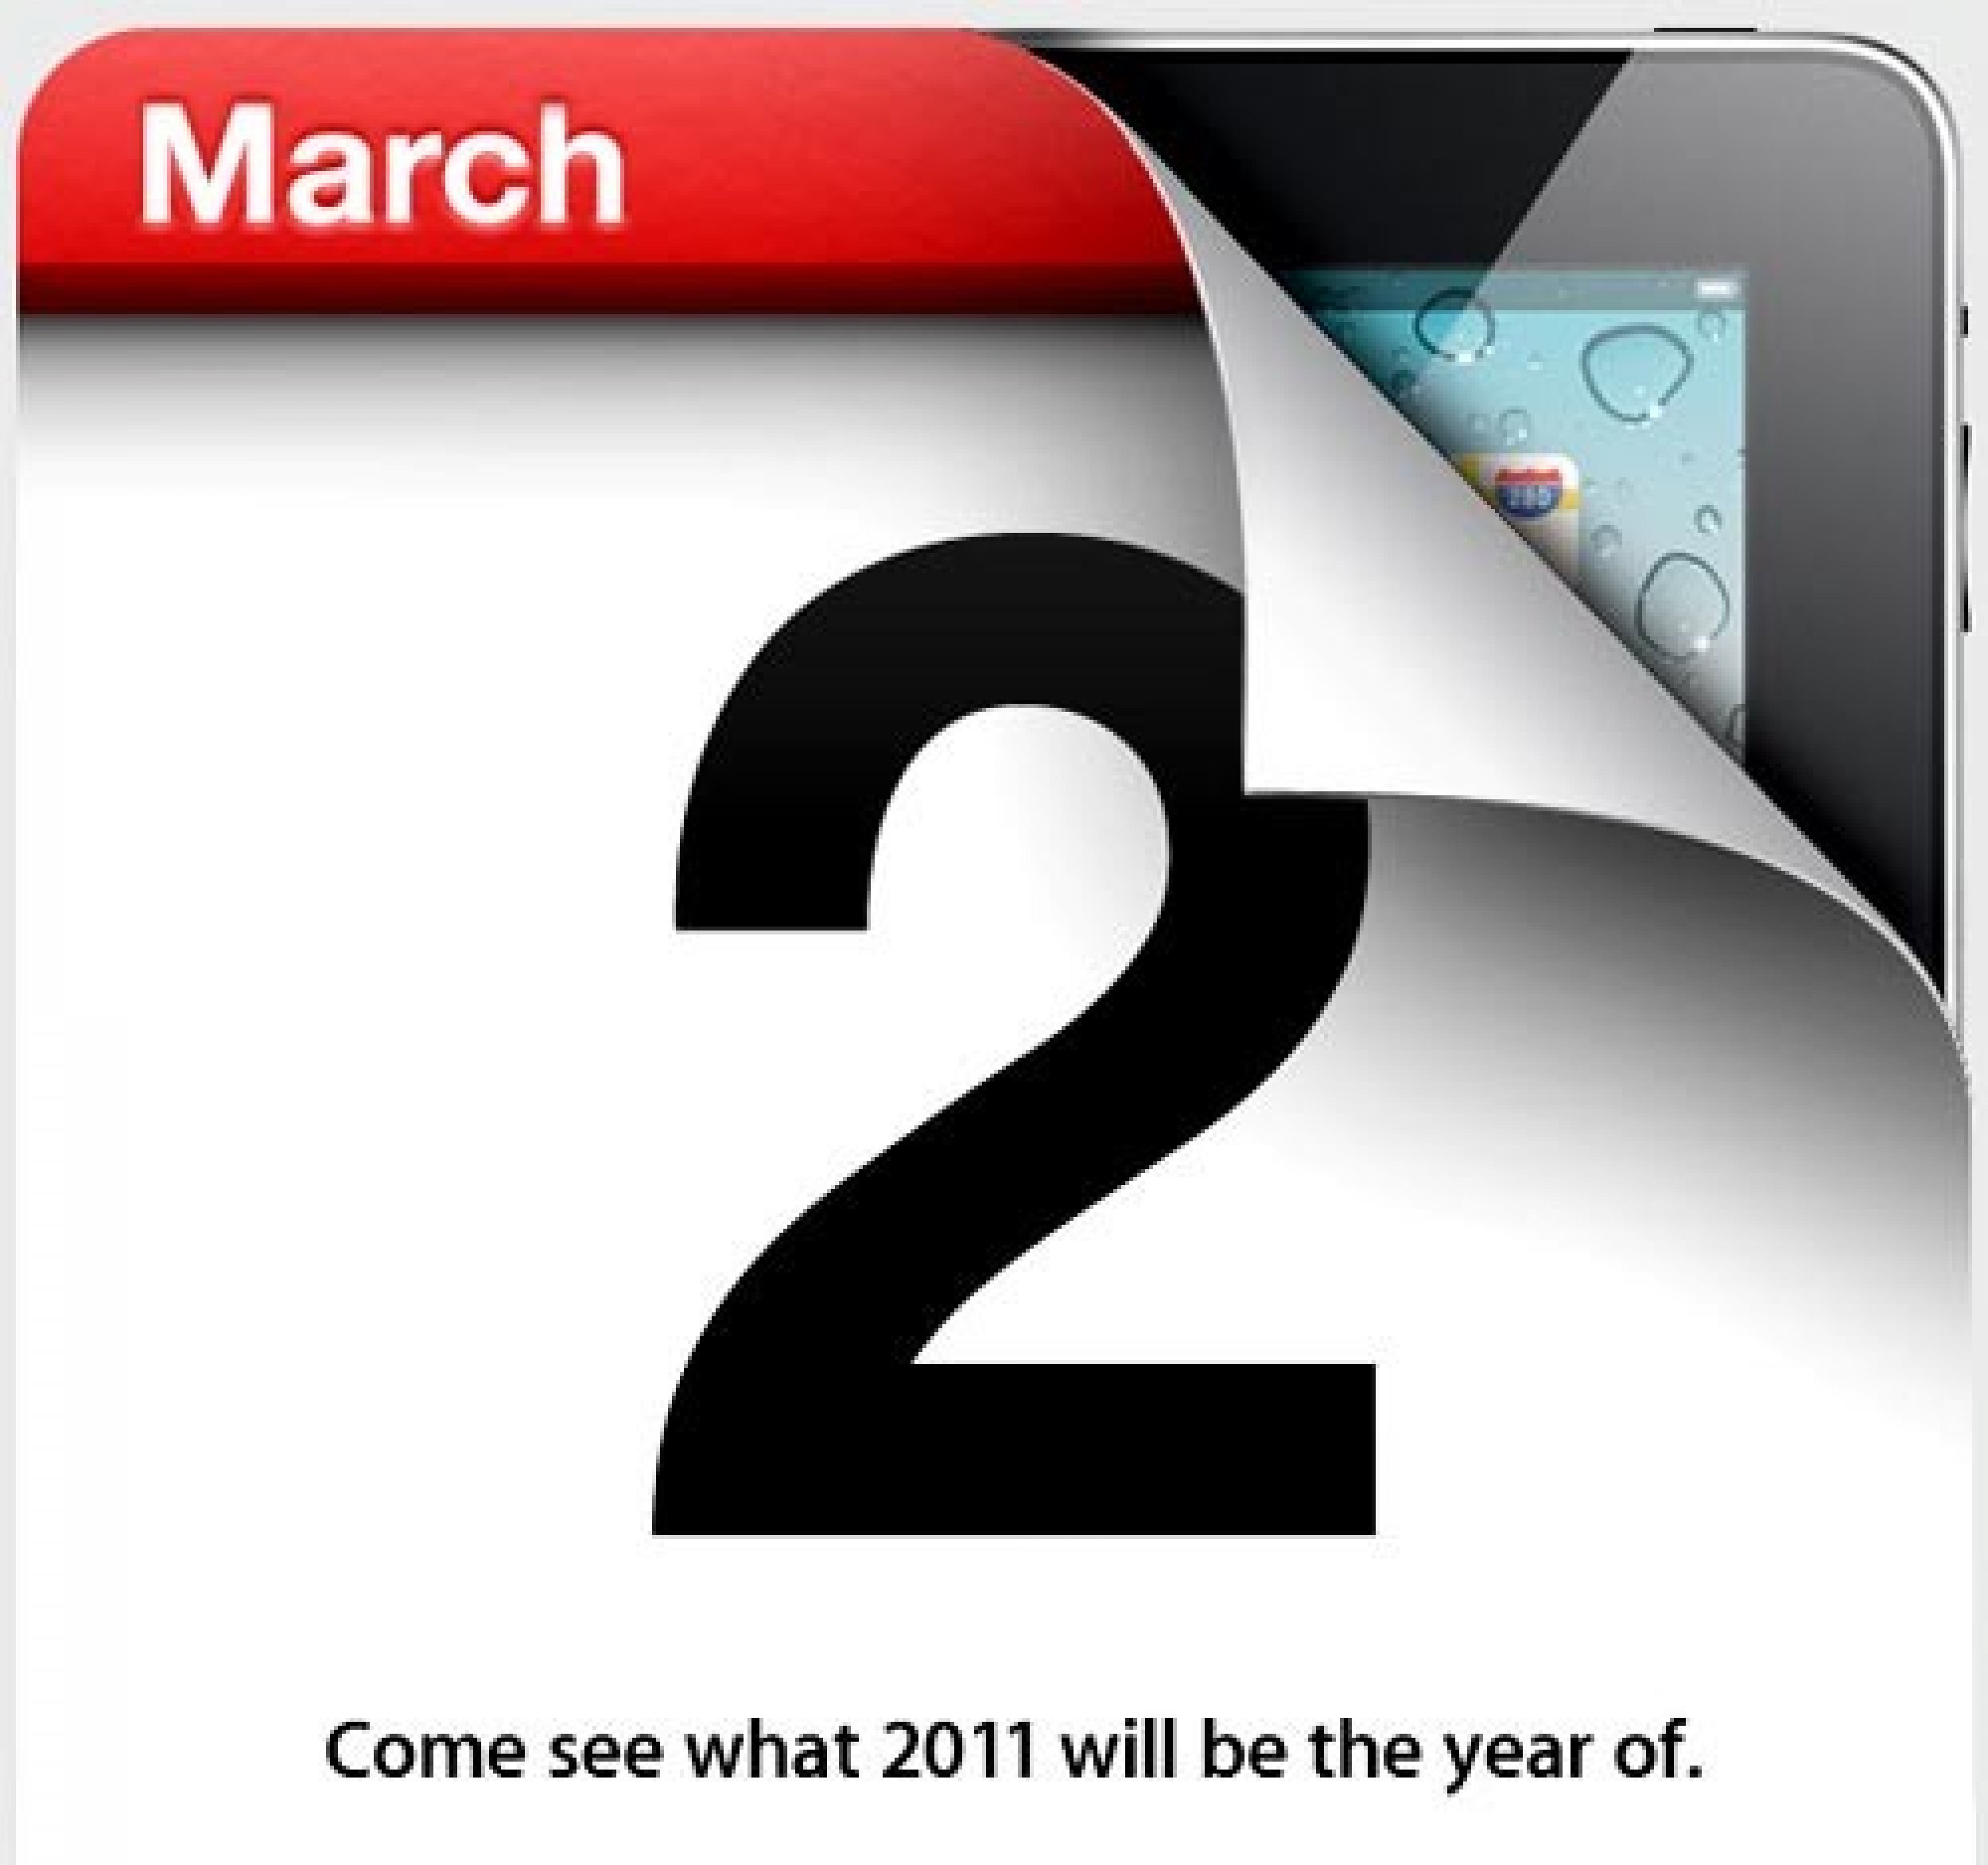 What To Expect From The iPad 2